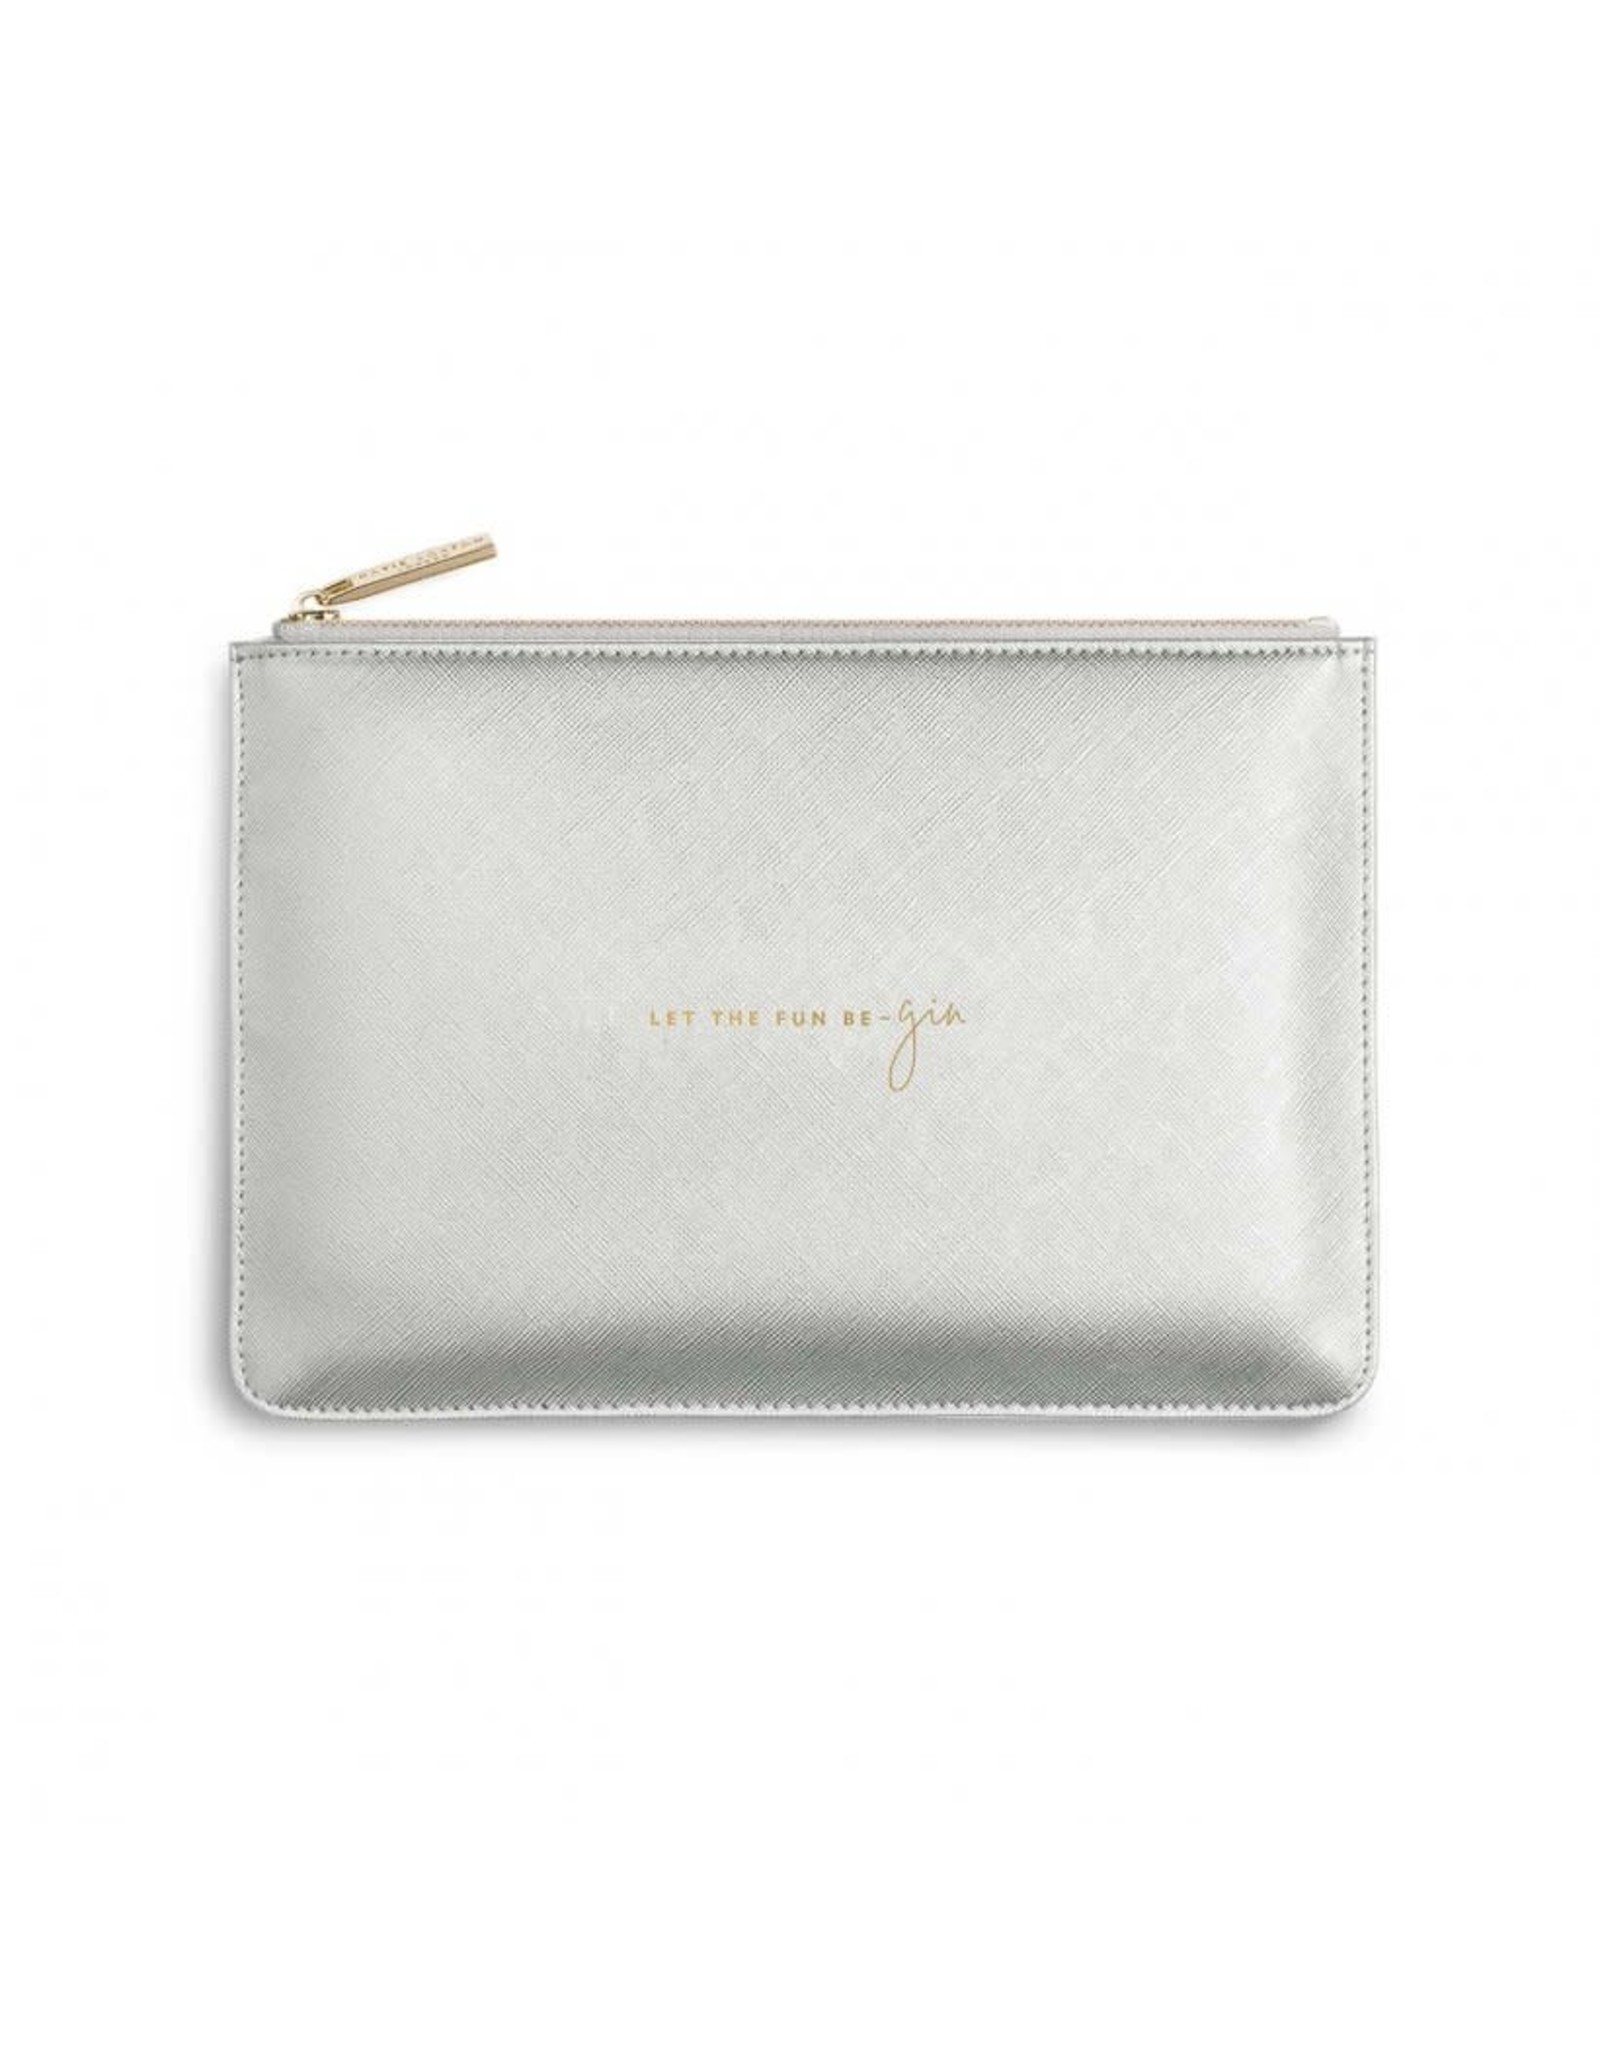 KATIE LOXTON PERF POUCH LET THE FUN BE-GIN MTLC SILVER